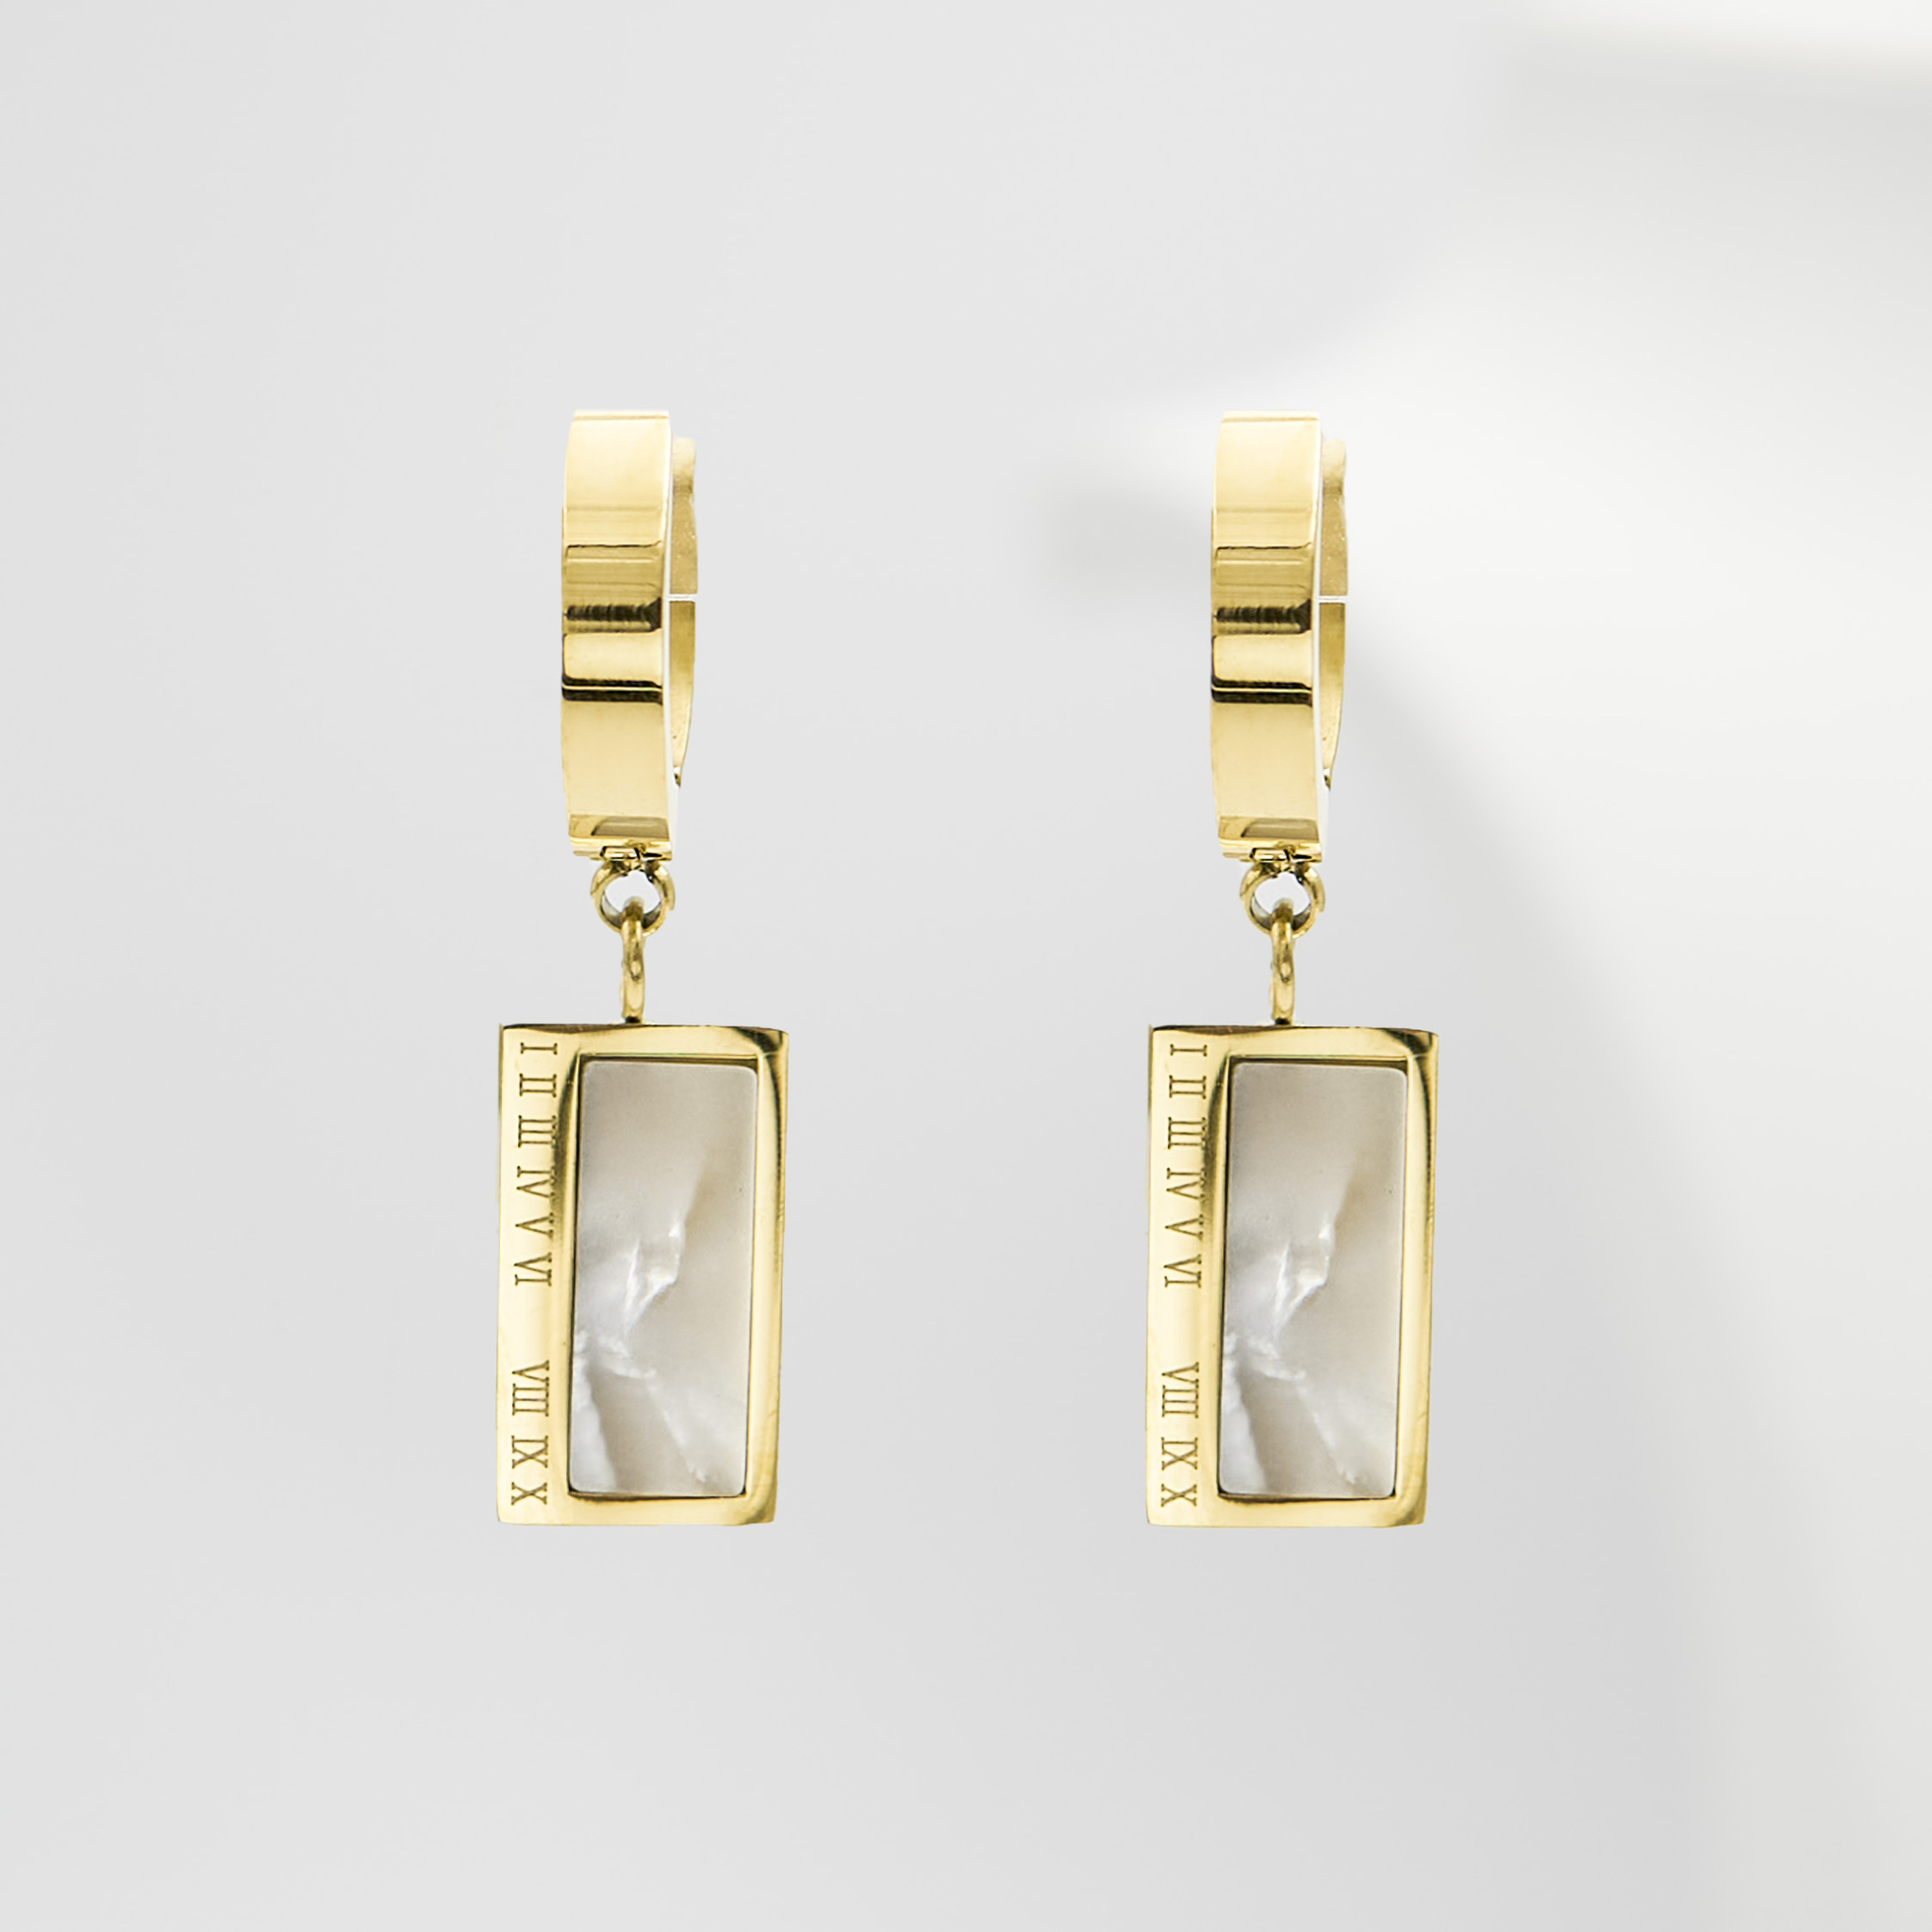 1- Era White Marble Gold Edition -Örhänge 316 L - Special Earrings From SWEVALI